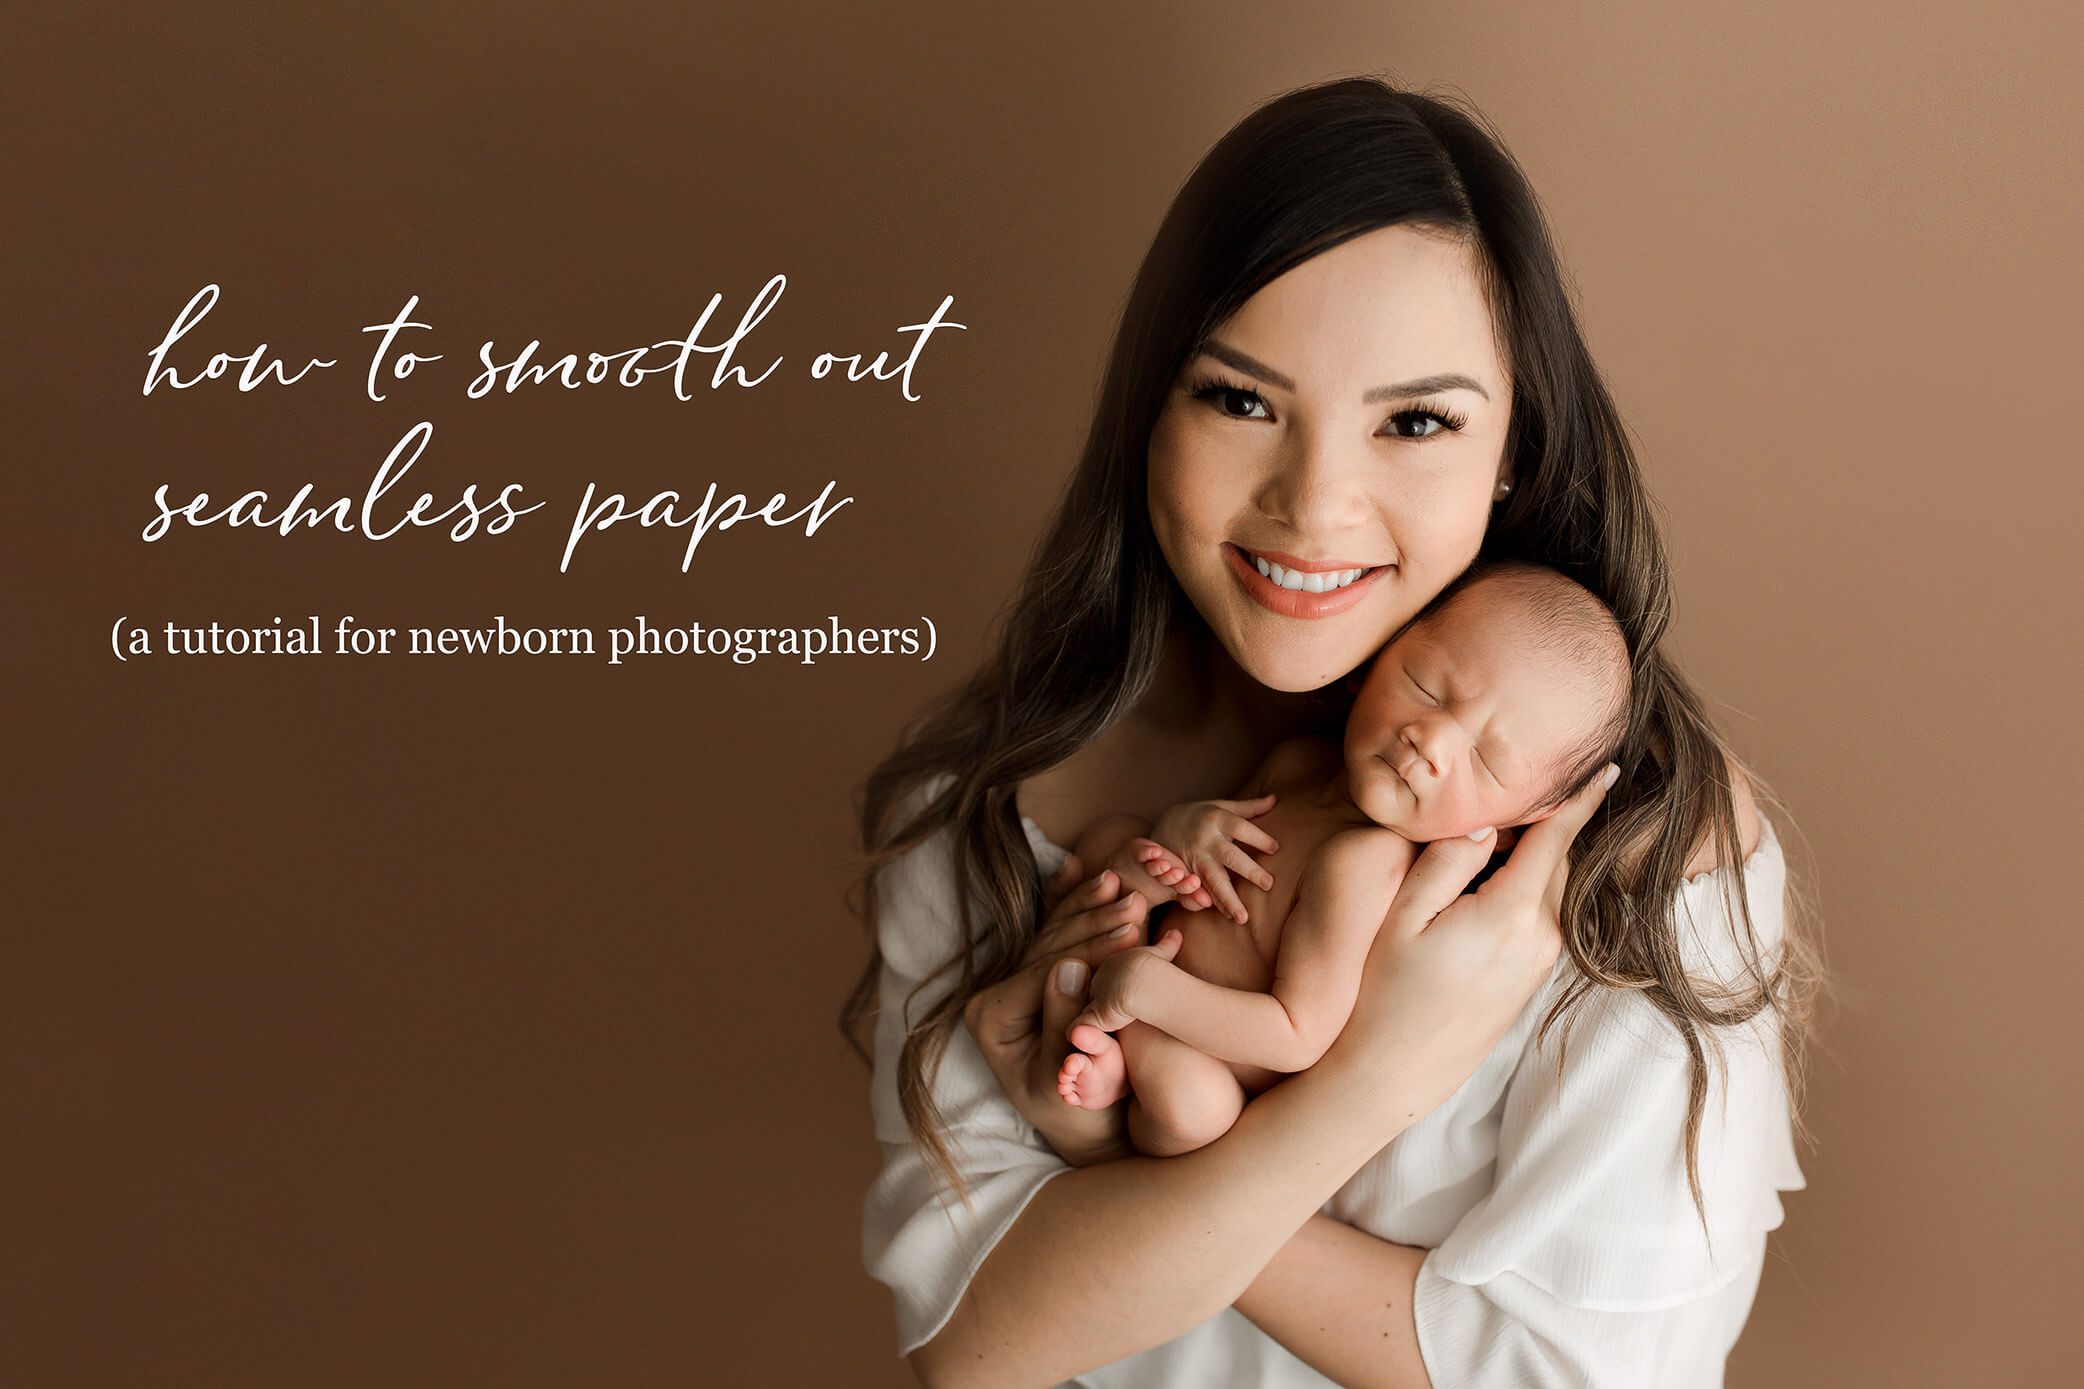 how-to-smooth-seamless-paper-in-photoshop-newborn-photography-tip